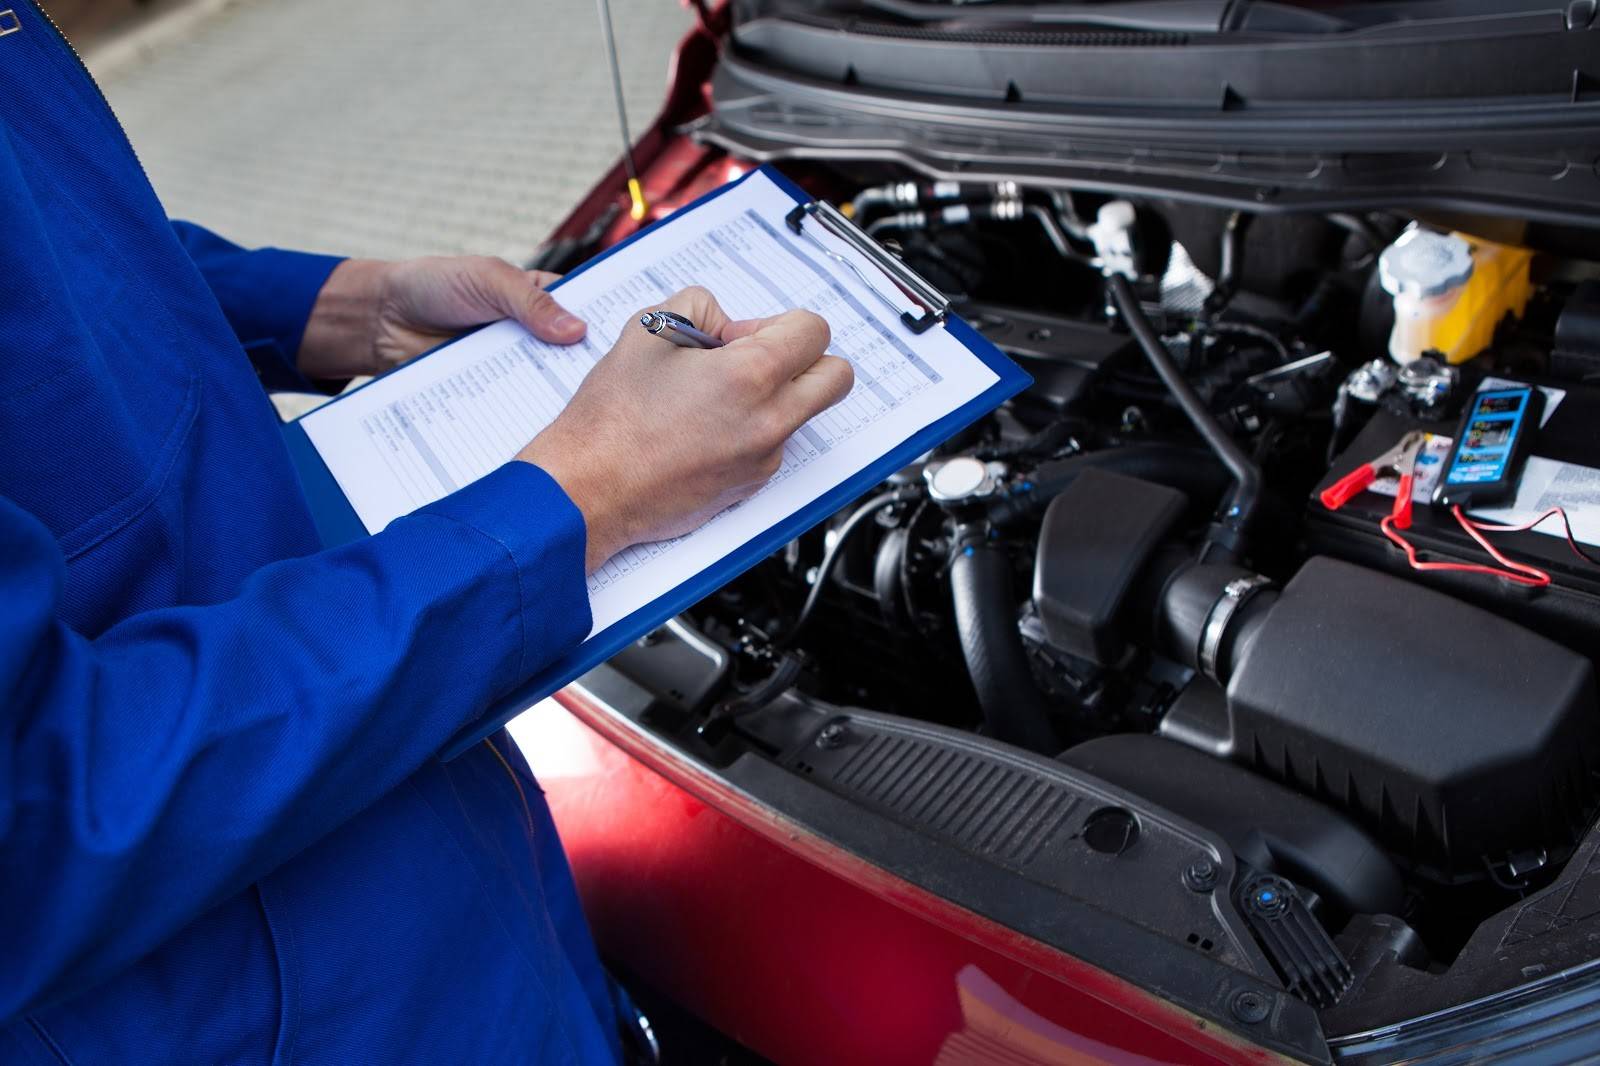 A mechanic reviewing a car maintenance checklist and observing an engine